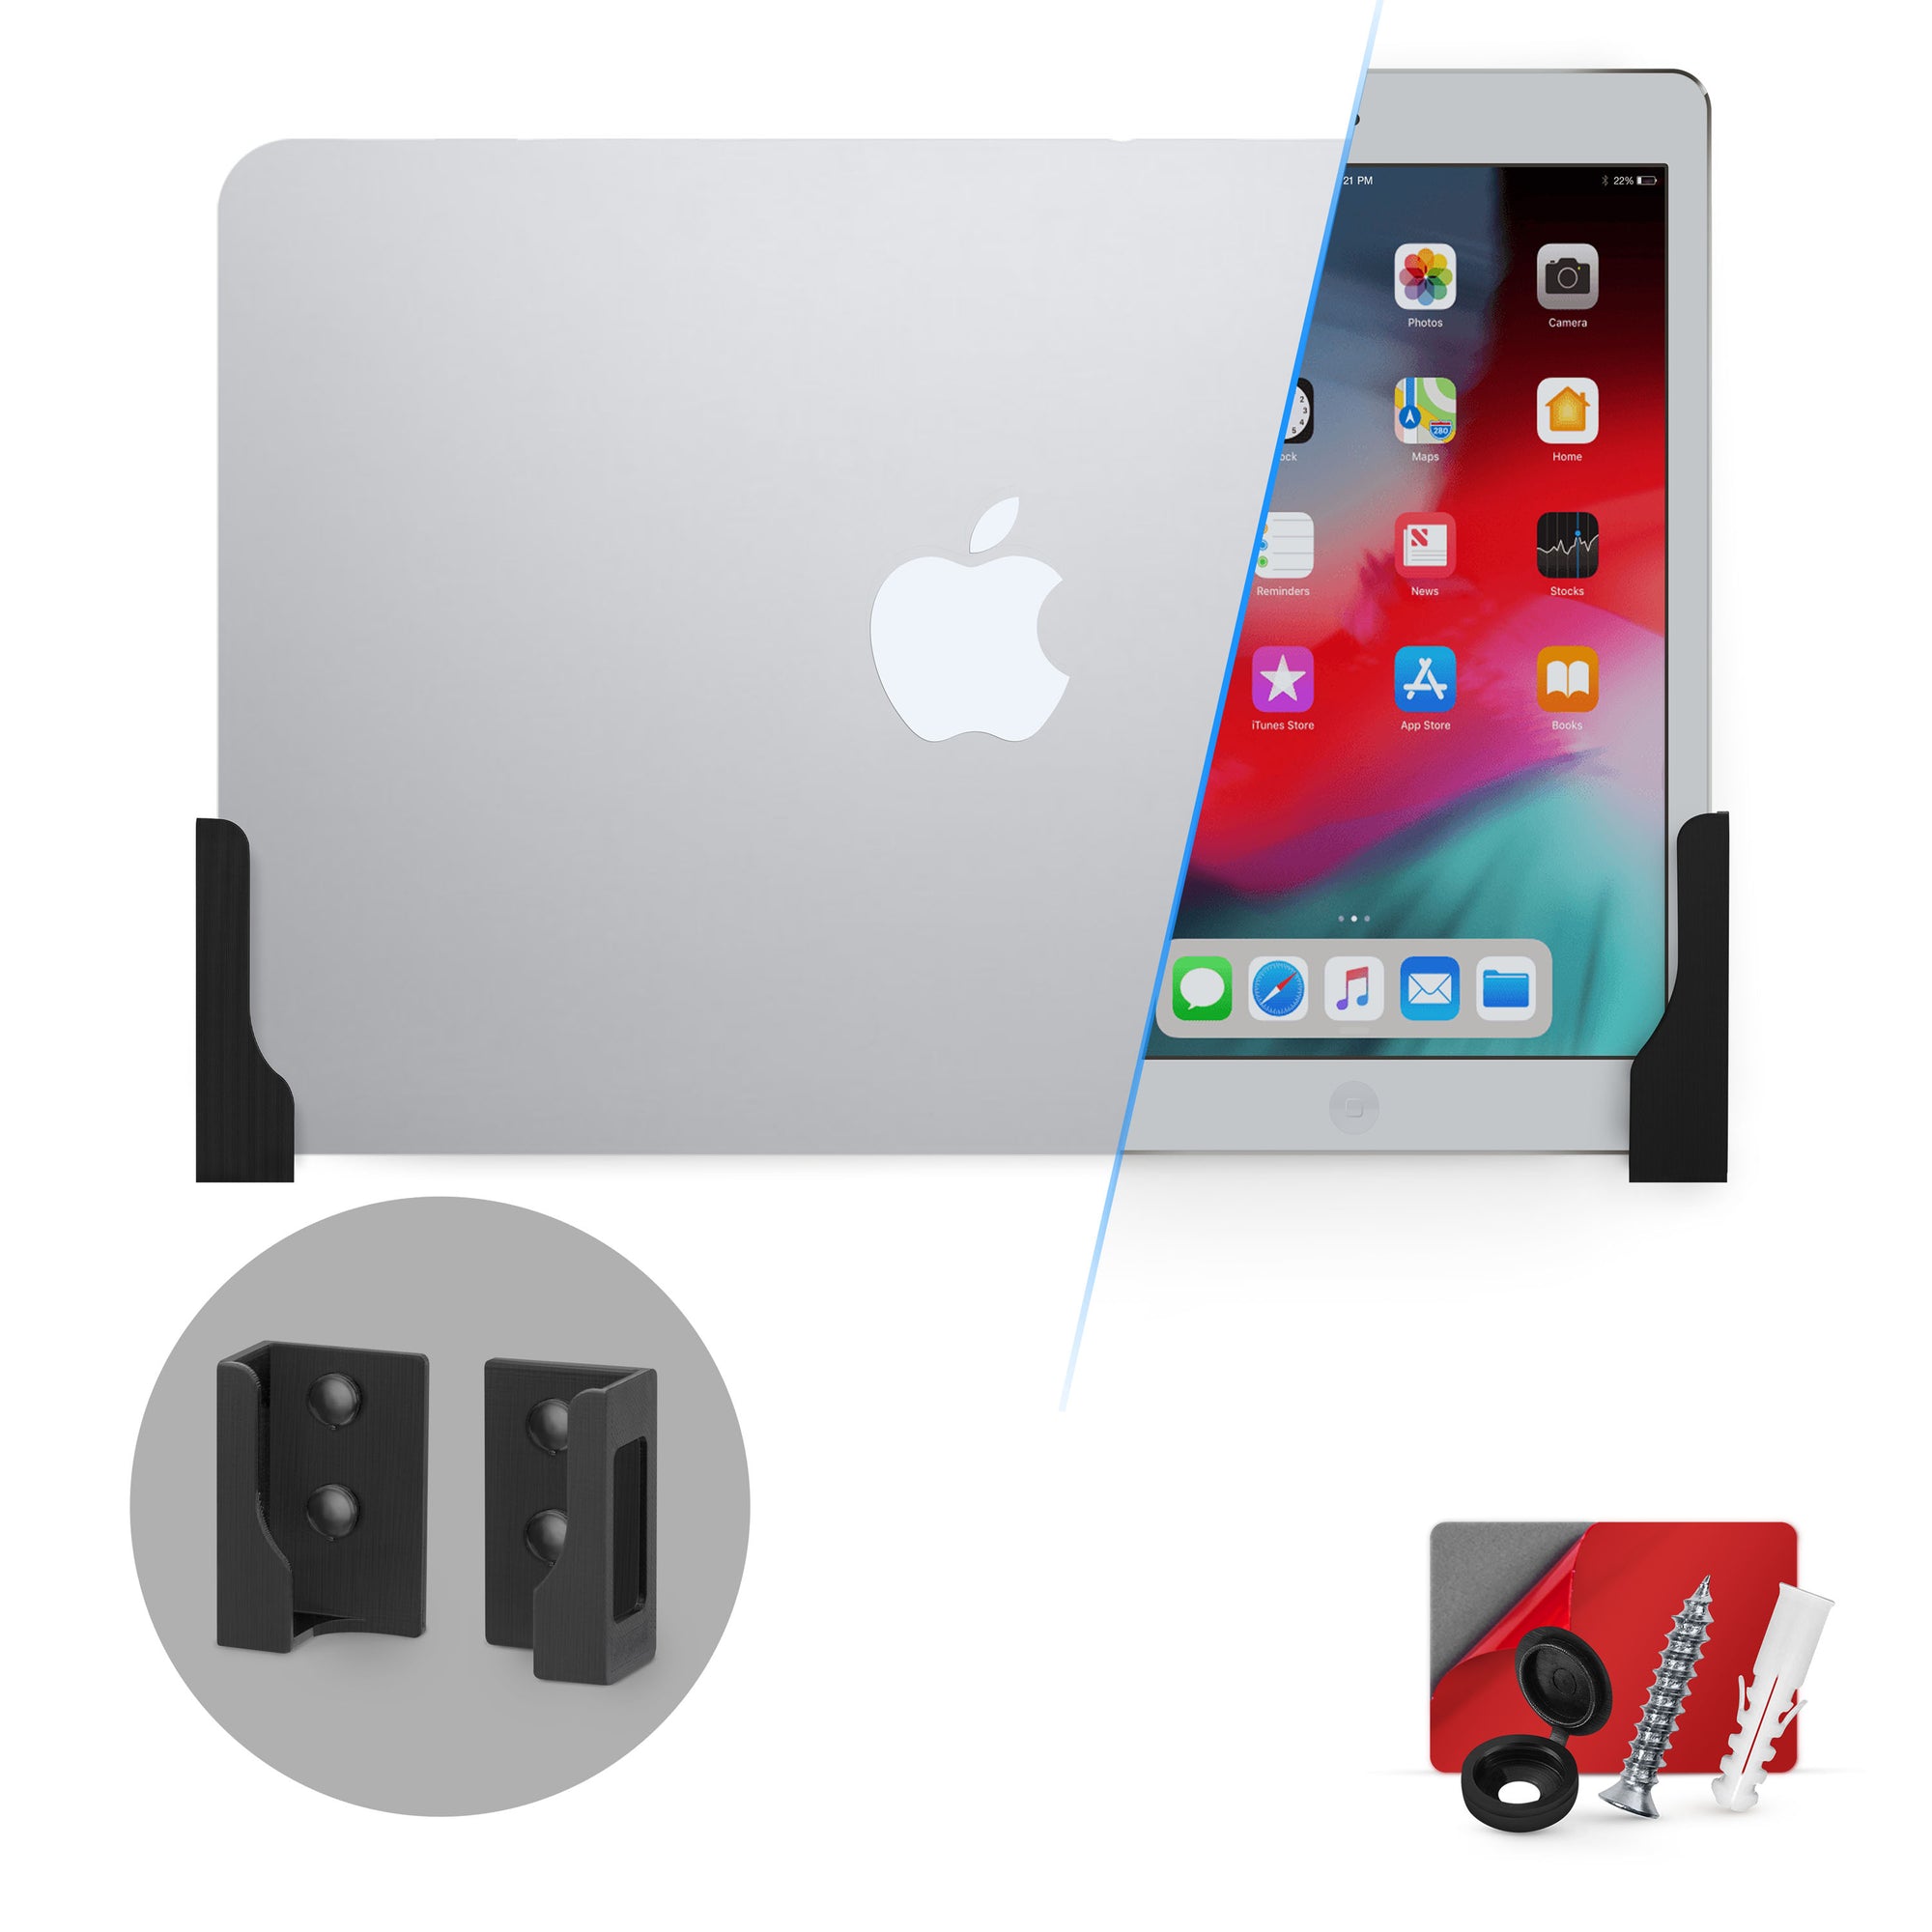 Adhesive Tablet & Slim Laptop Wall Mount Holder for iPad, Android, Macbook, Surface, iPad Air, Mini & Pro, Galaxy Tab Note eBooks, Kindle & More